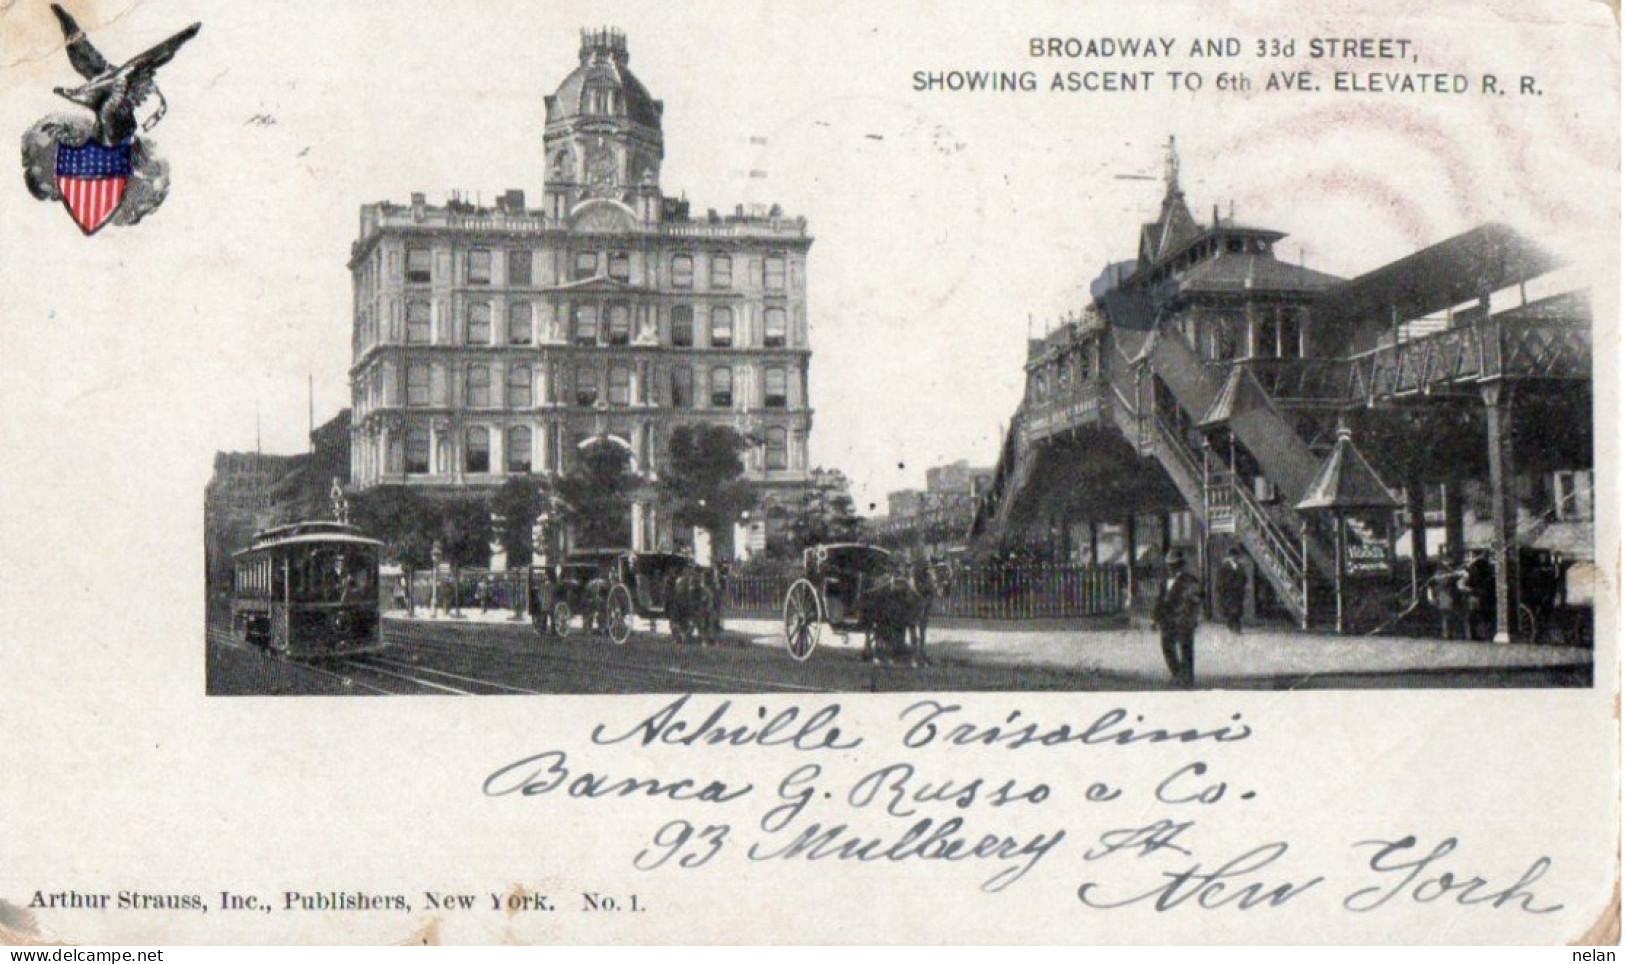 NEW YORK  - BROADWAY AND 33d STREET - SHOWING ASCENT TO 6th AVE. ELEVATED R. R. - 1898 - Broadway